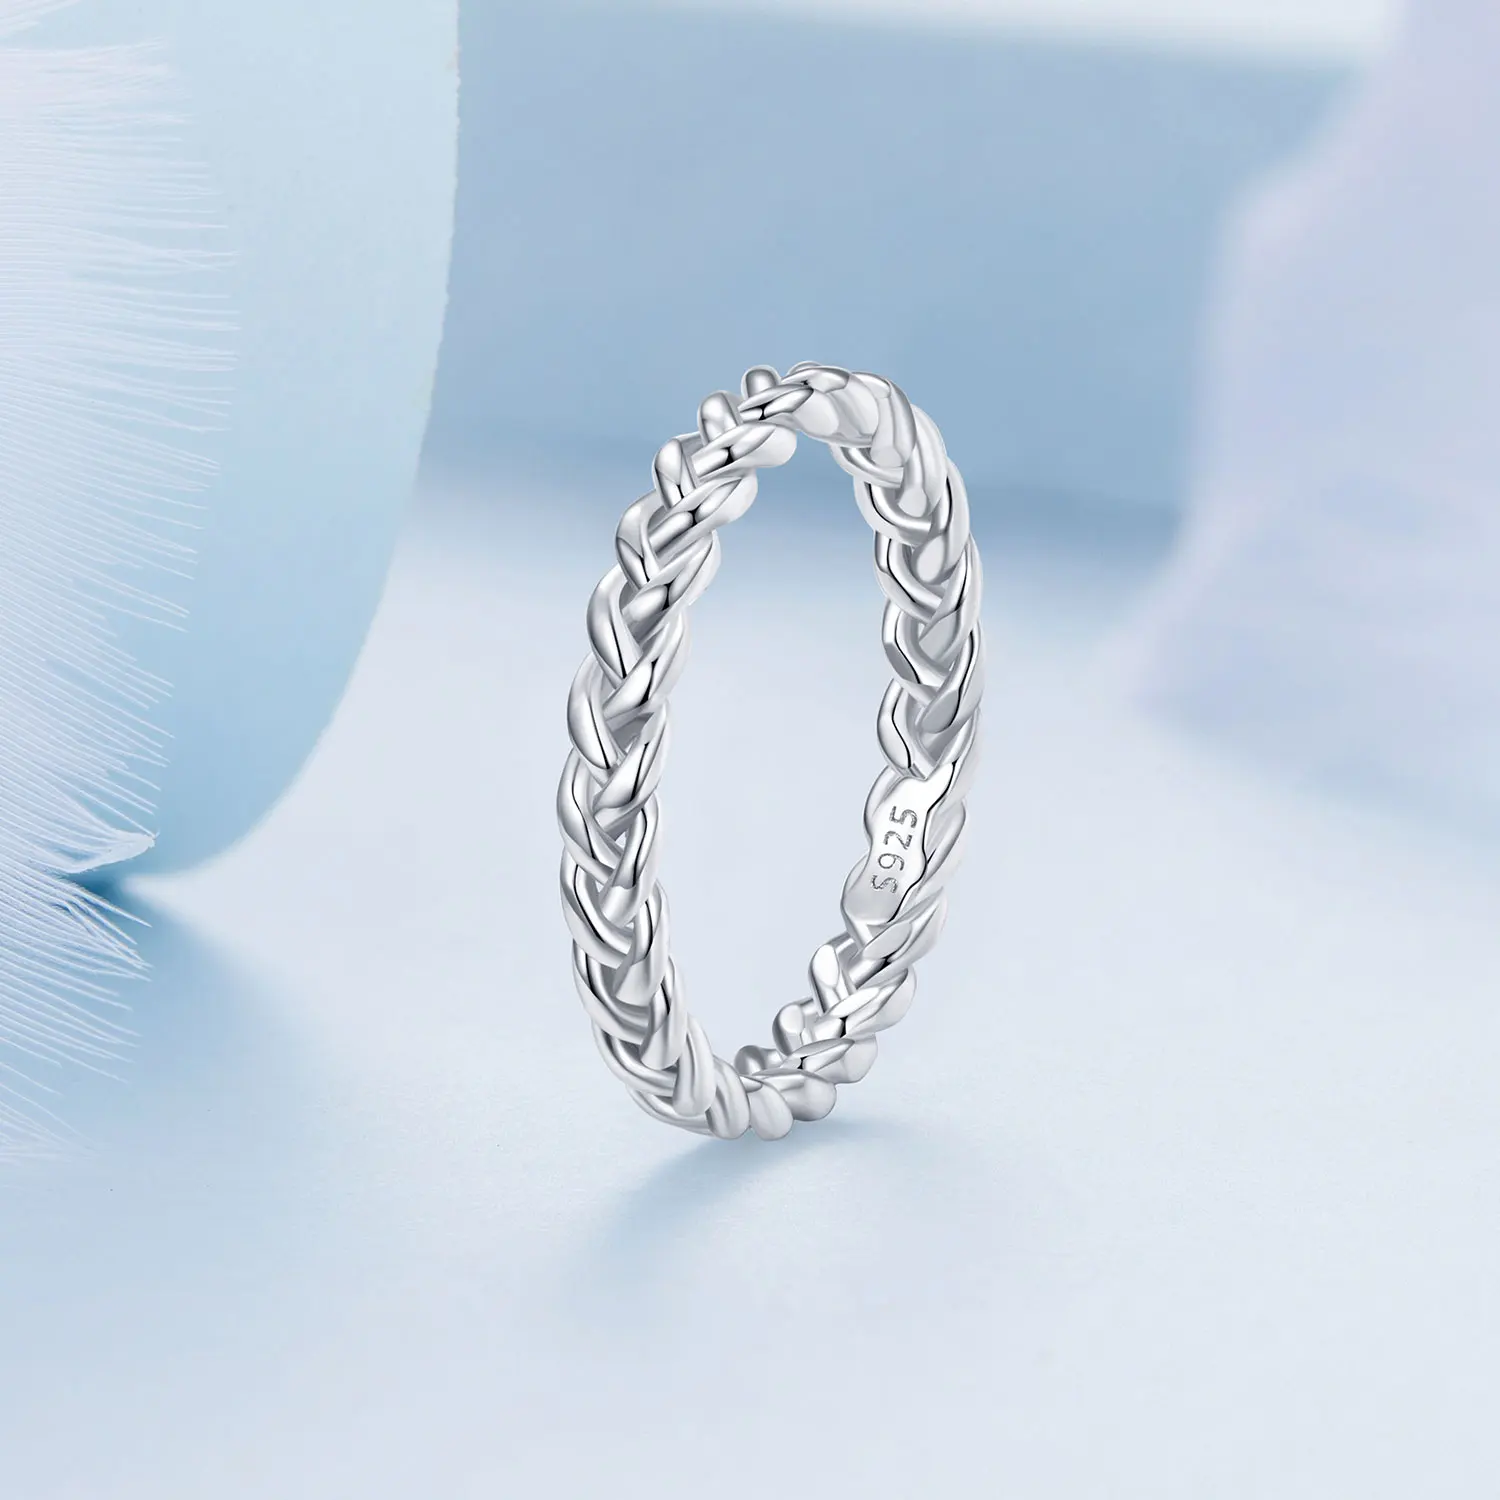 

French Romance S925 Sterling Silver Simple Braided Textured Twisted Eternal Love Ring Beautiful Women Jewelry Gifts